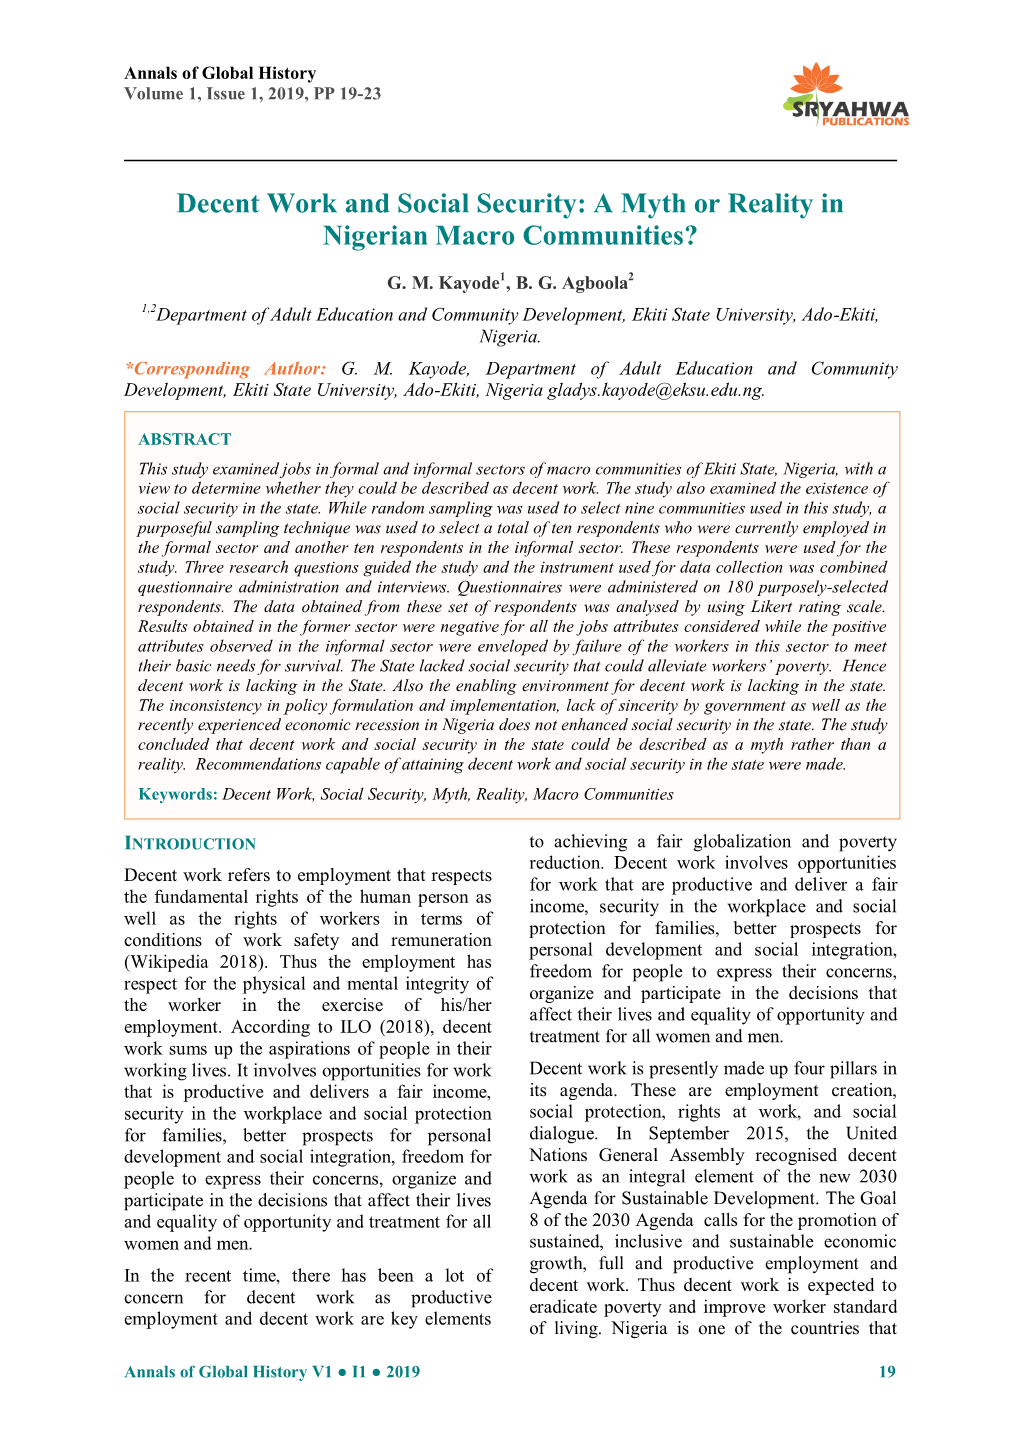 Decent Work and Social Security: a Myth Or Reality in Nigerian Macro Communities?